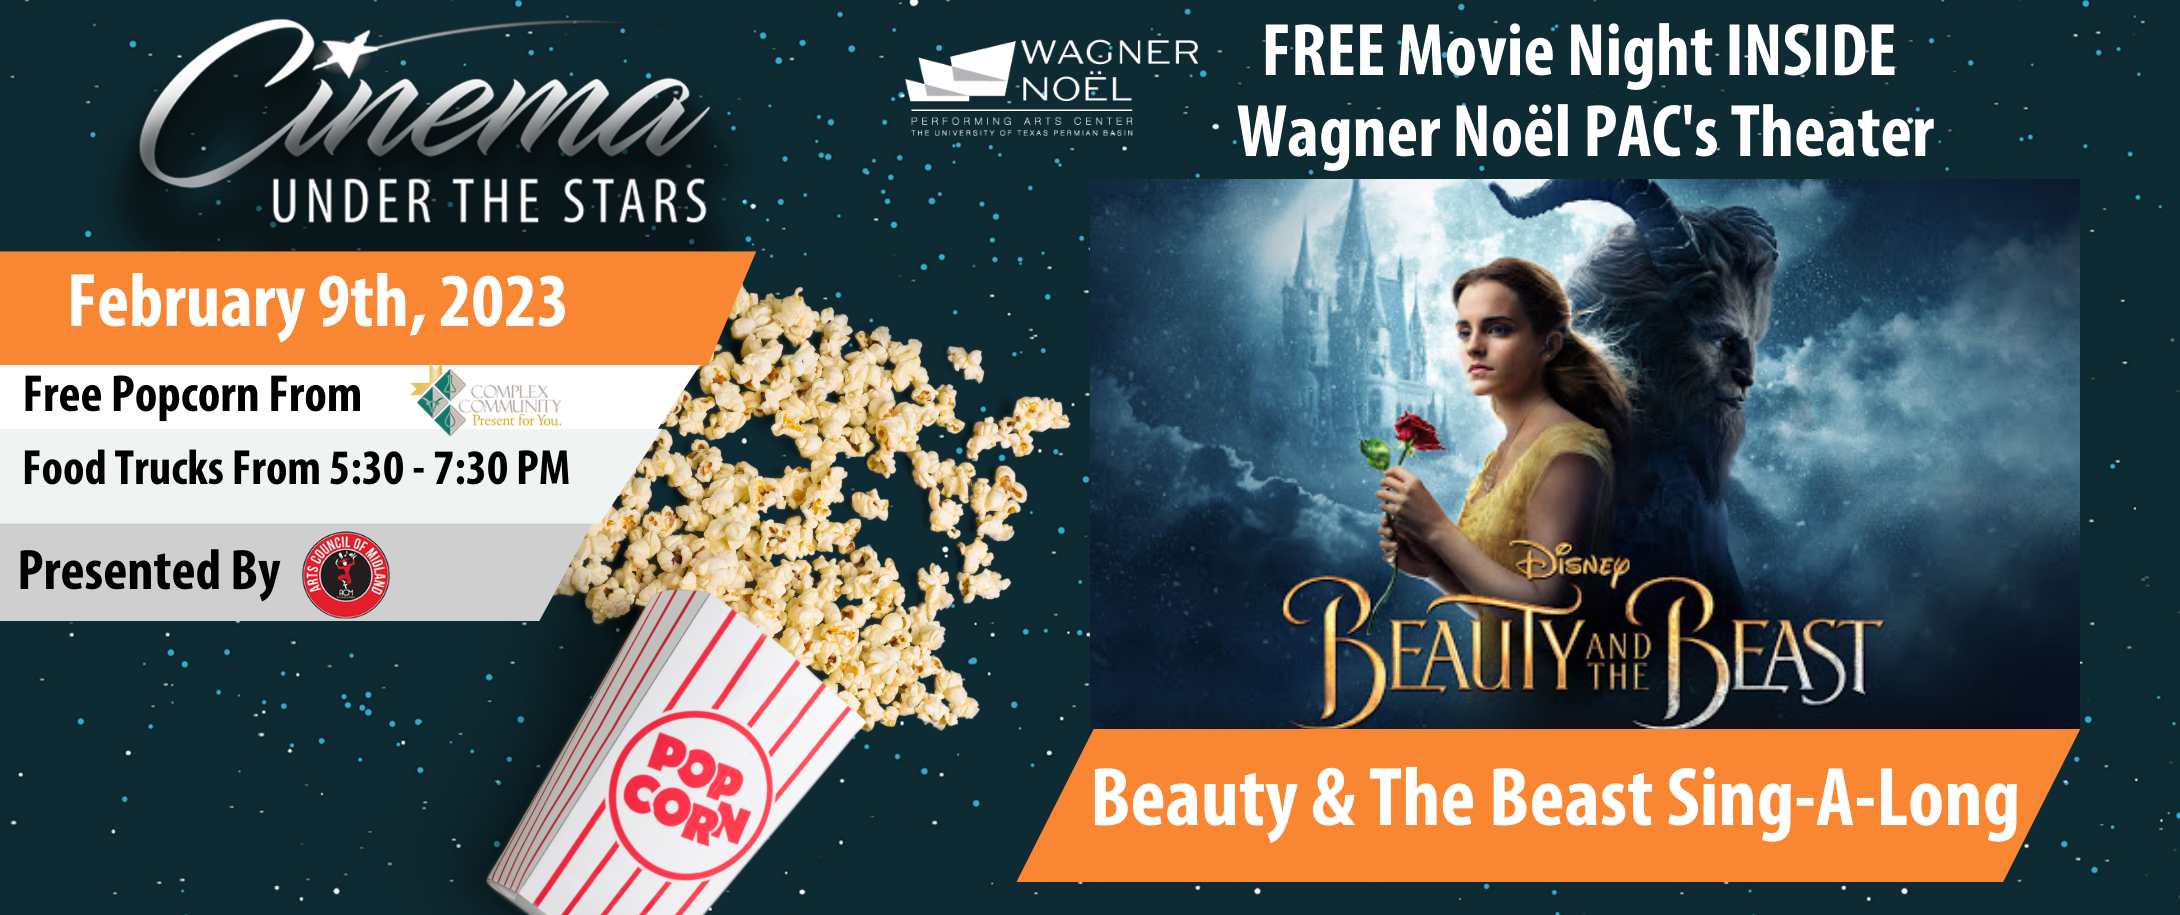 FREE Cinema Under the Stars - Beauty & The Beast Sing-A-Long Sponsored by Arts Council of Midland